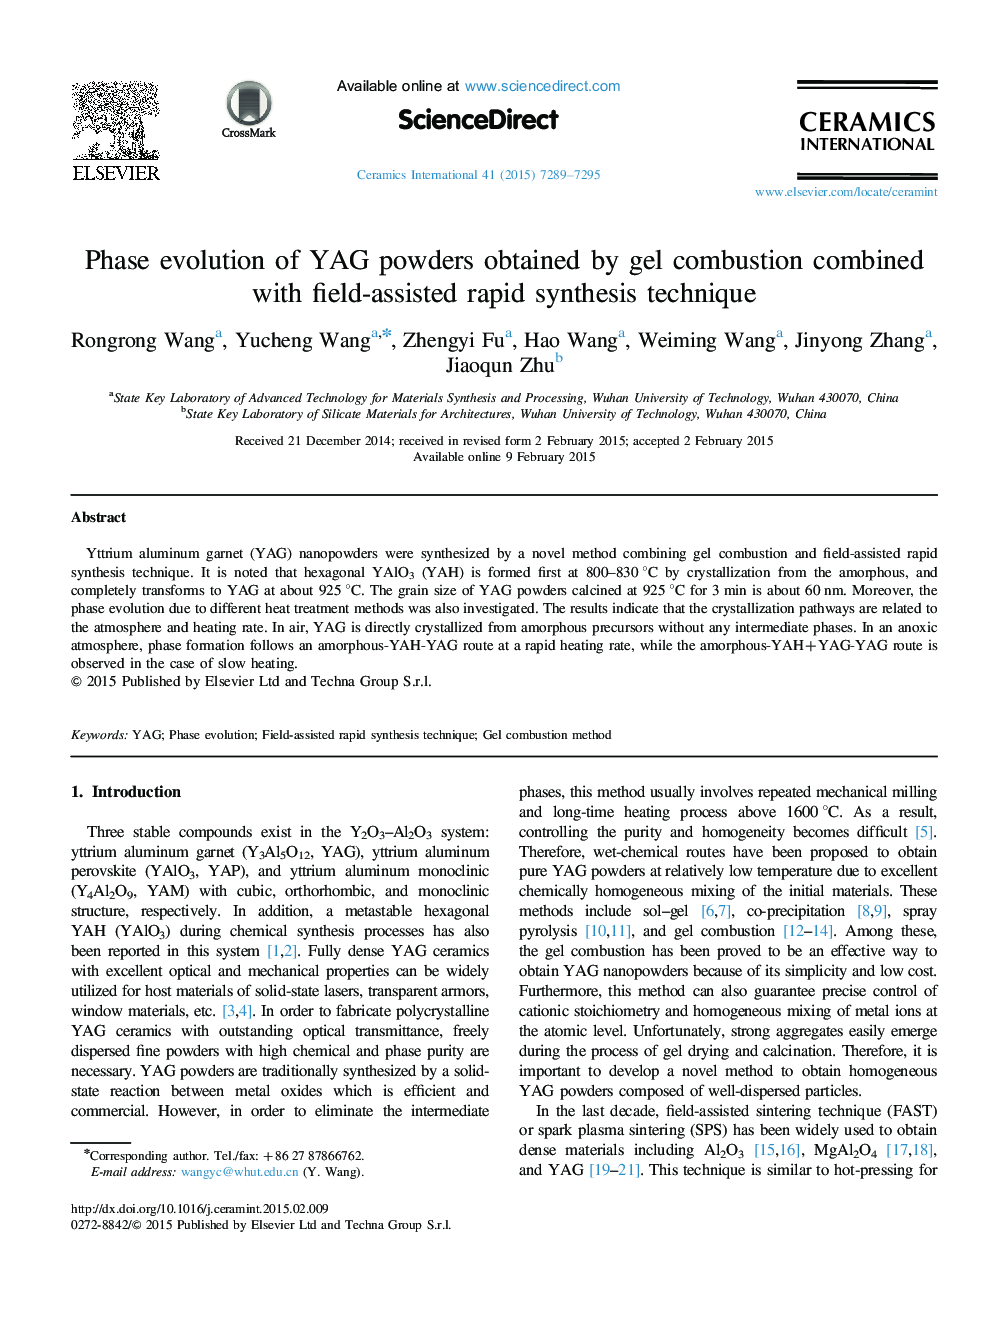 Phase evolution of YAG powders obtained by gel combustion combined with field-assisted rapid synthesis technique